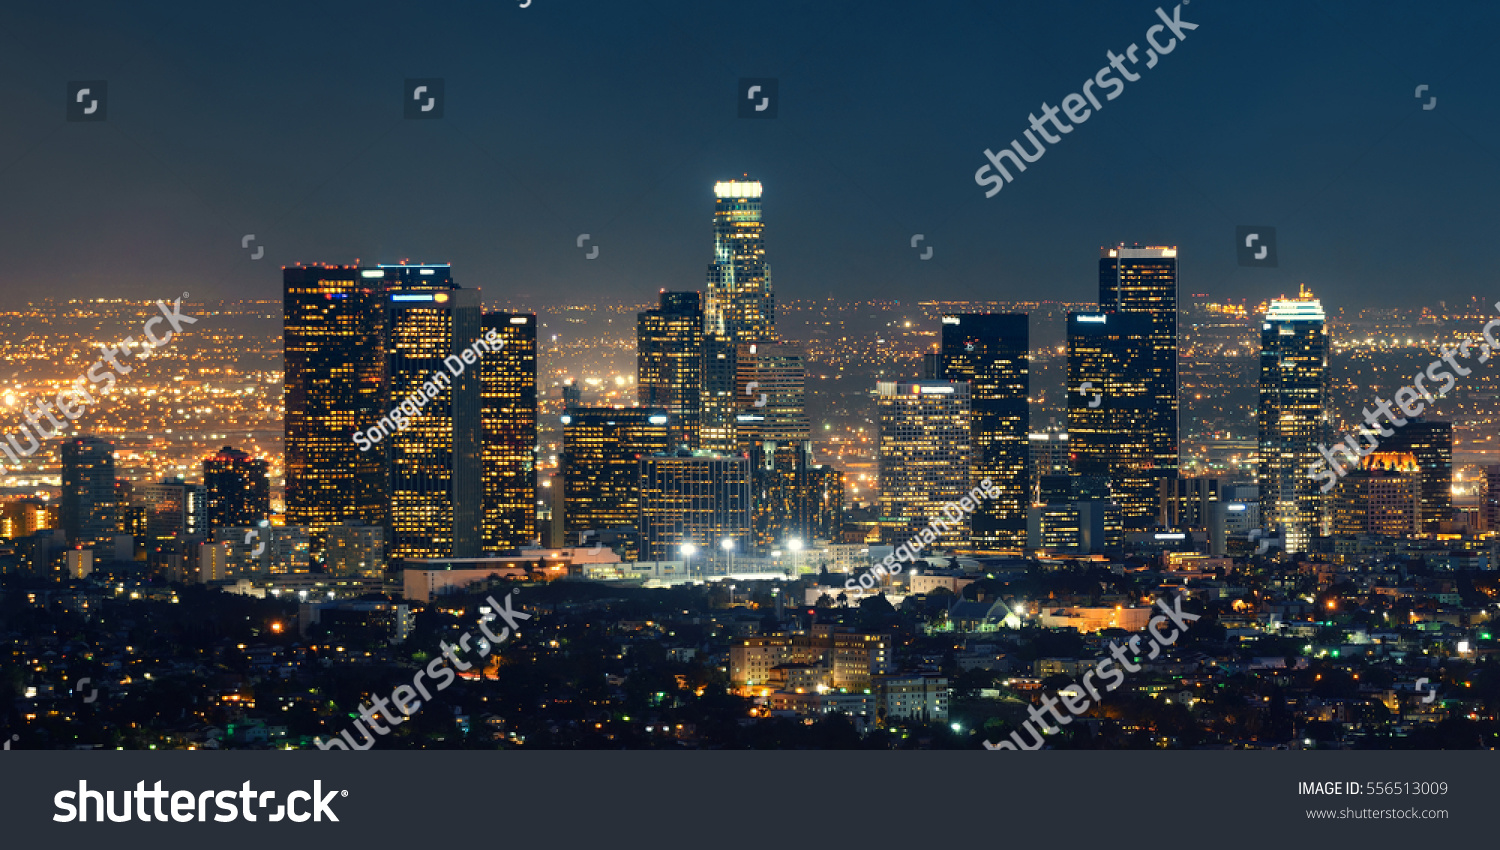 Los Angeles downtown buildings at night #556513009